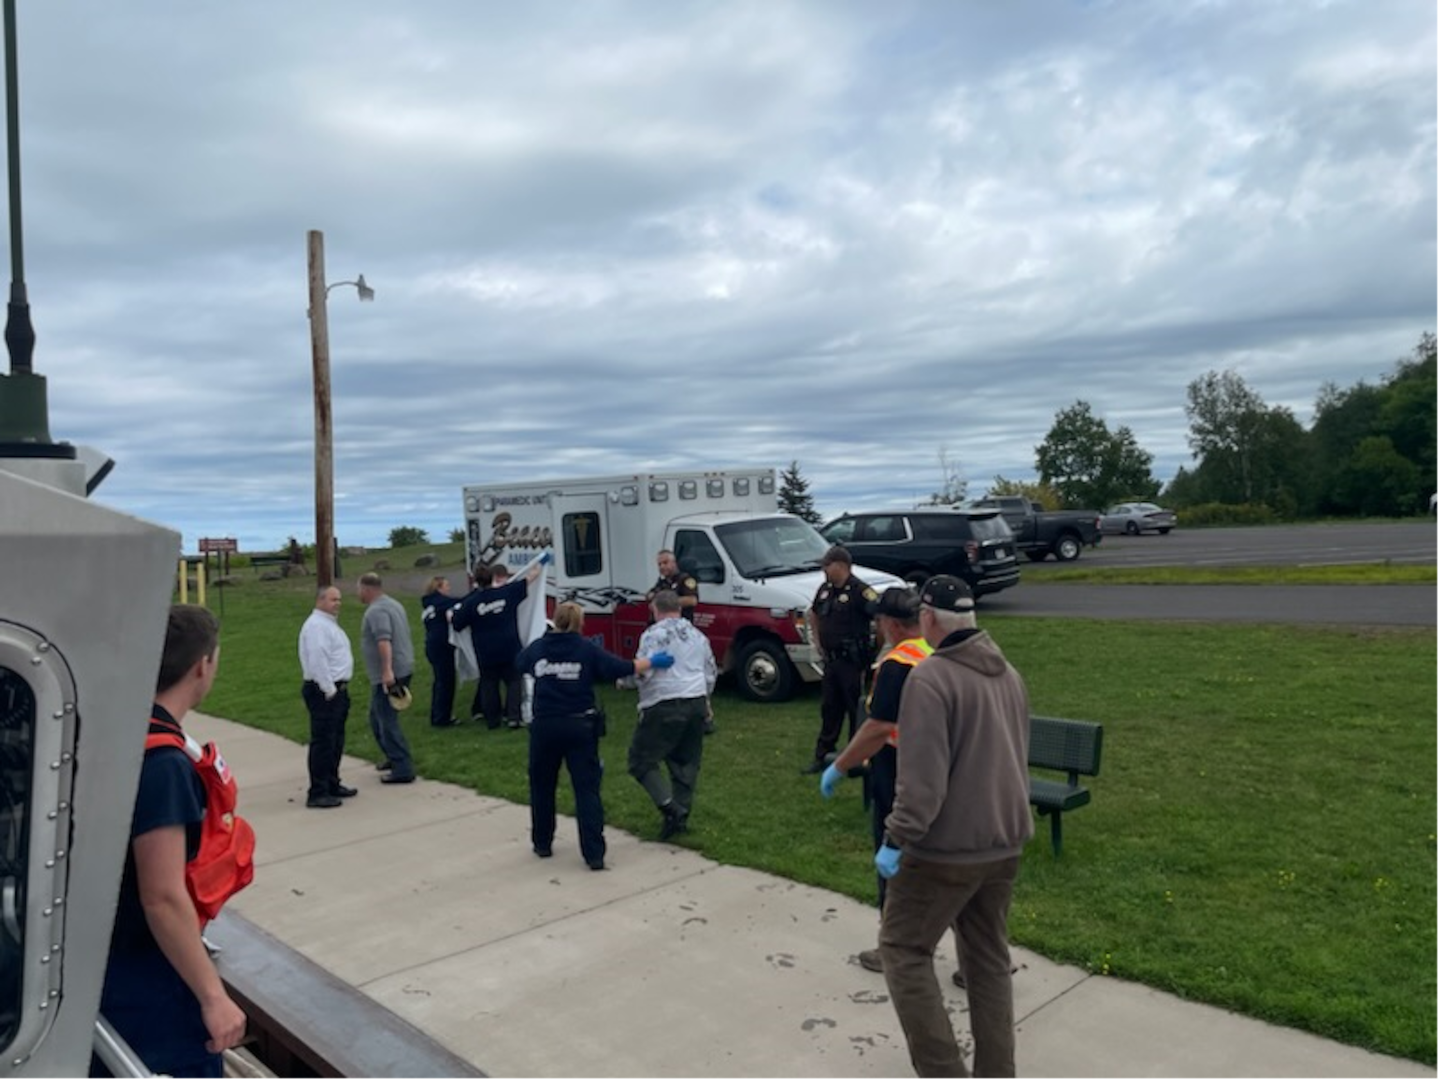 Coast Guard Sector Sault Sainte Marie command center watch standers received a mayday distress broadcast via VHF radio at 11:26 a.m. from a person who reported their vessel was rapidly taking on water.